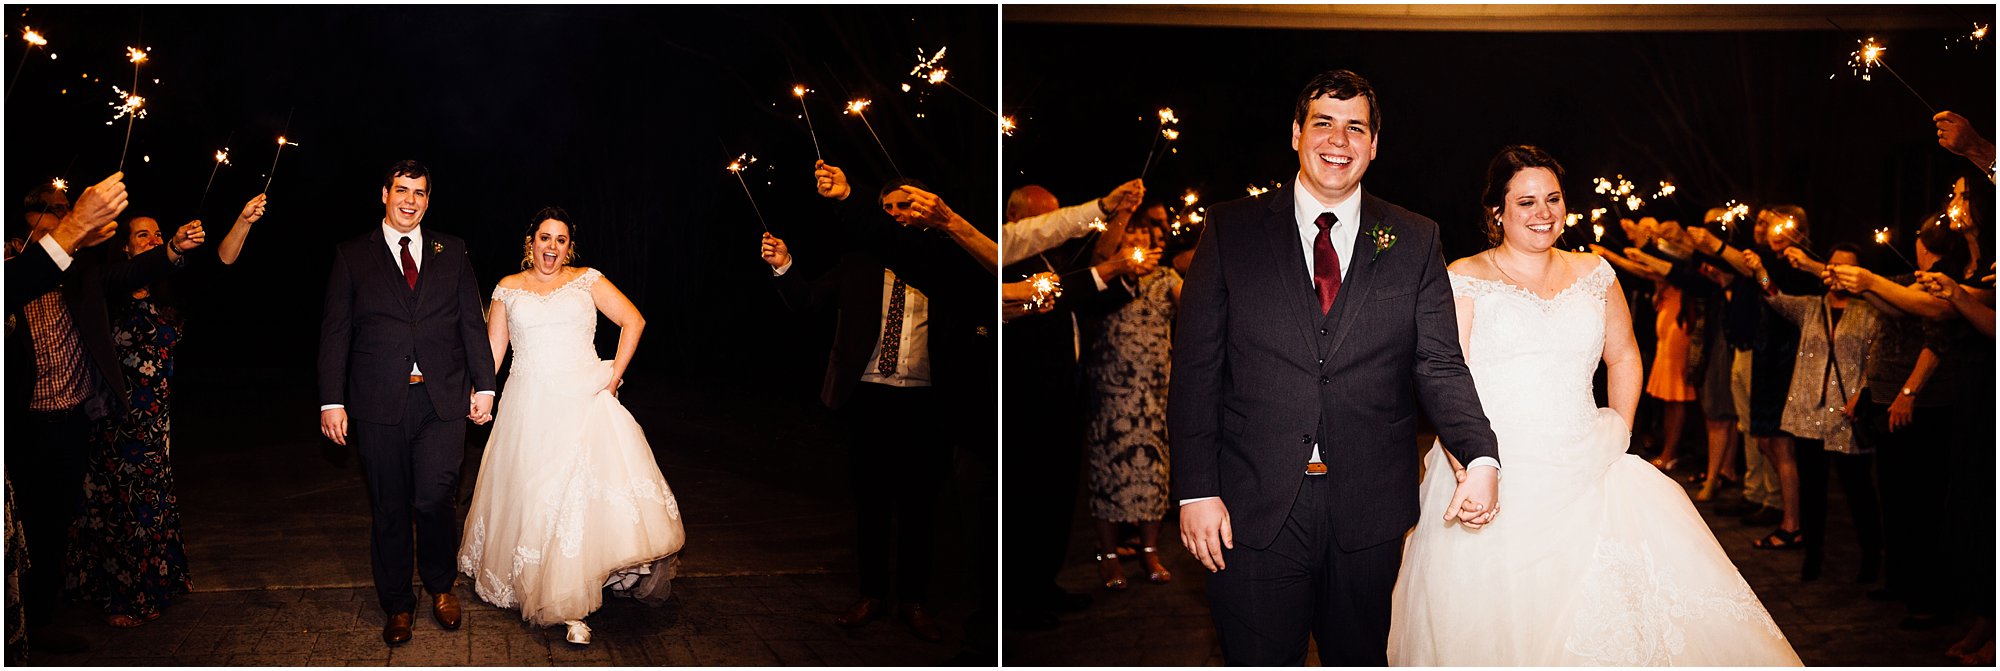 Giddy couple exiting their wedding reception surrounded by sparklers